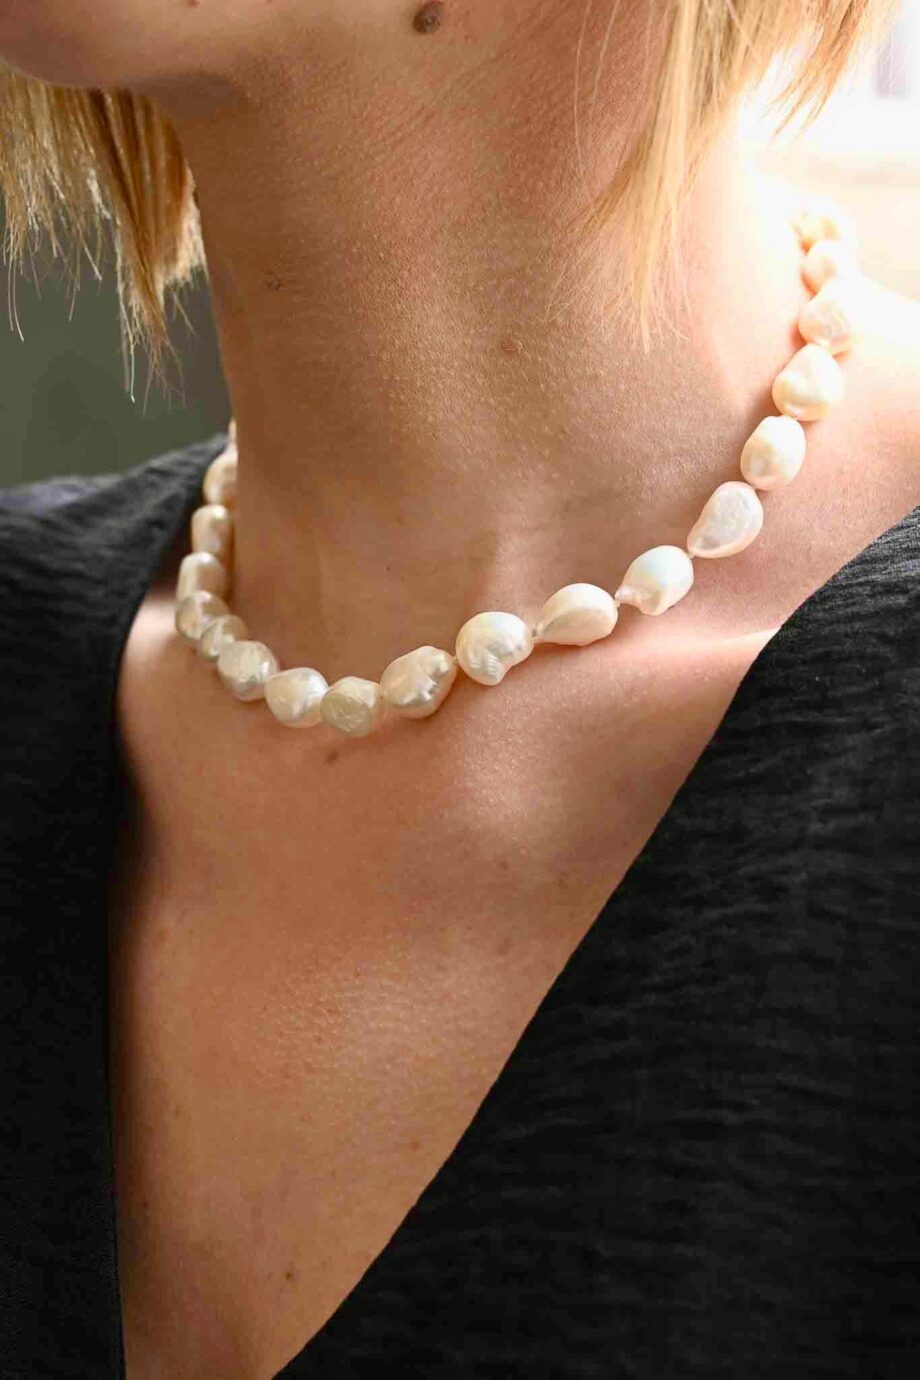 Collier perles baroques